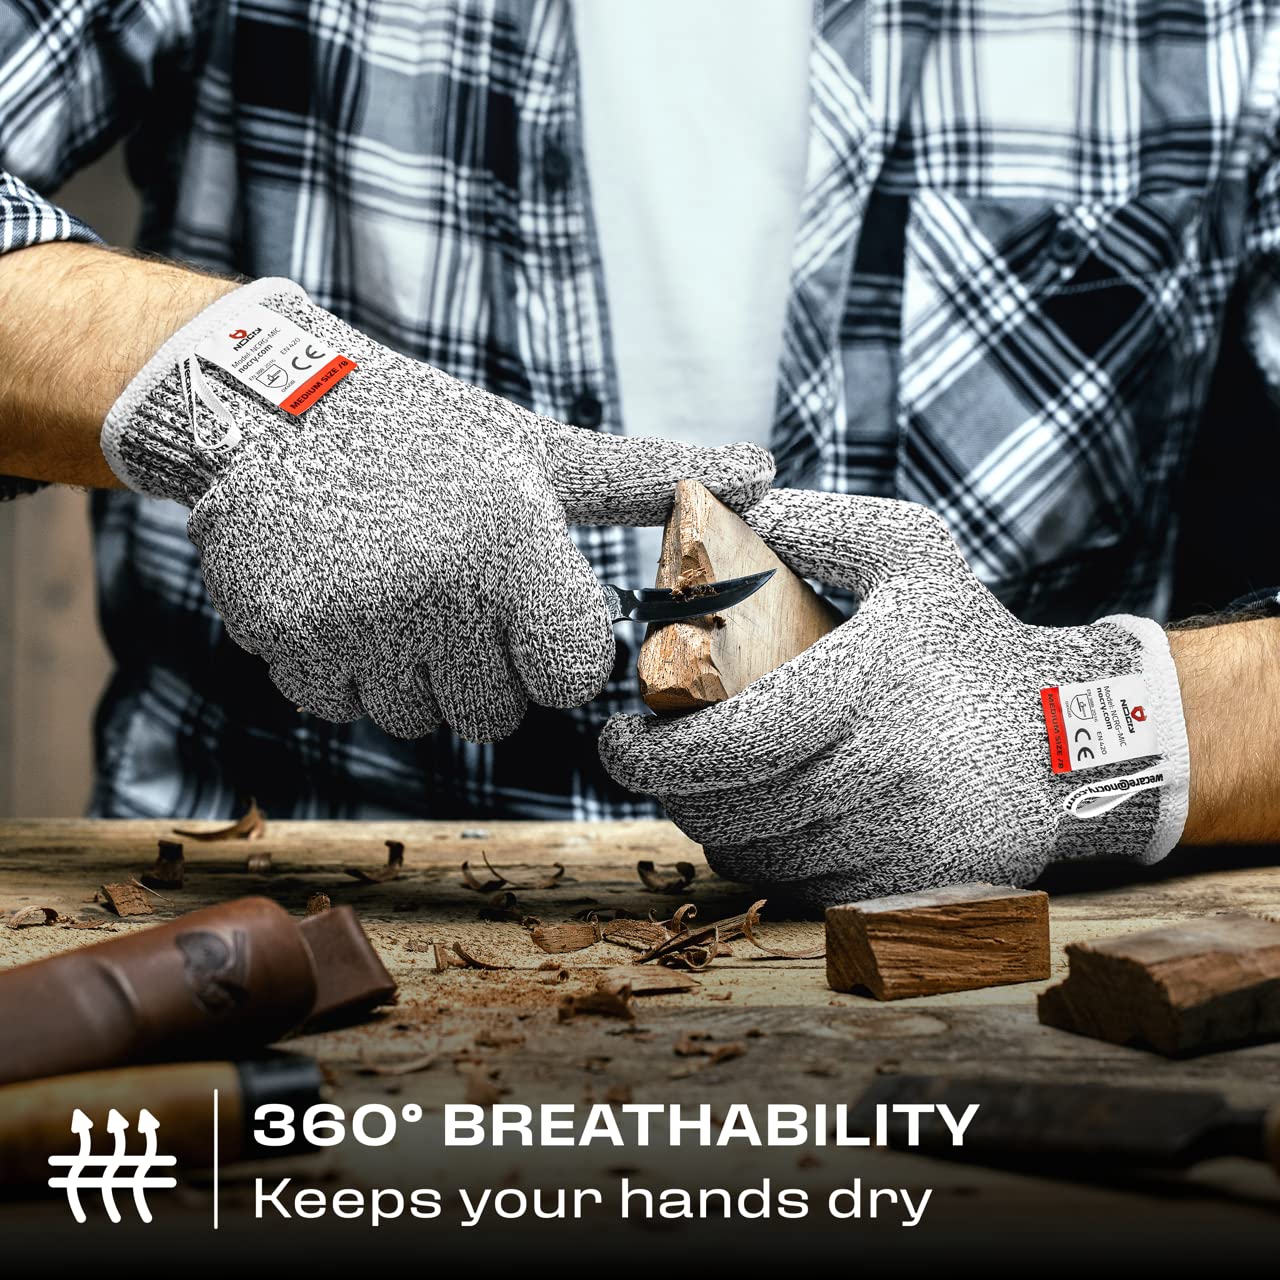 NoCry Premium Cut Resistant Gloves Food Grade — Level 5 Protection; Ambidextrous; Machine Washable; Superior Comfort and Dexterity; Lightweight Protective Gloves; Complimentary eBook